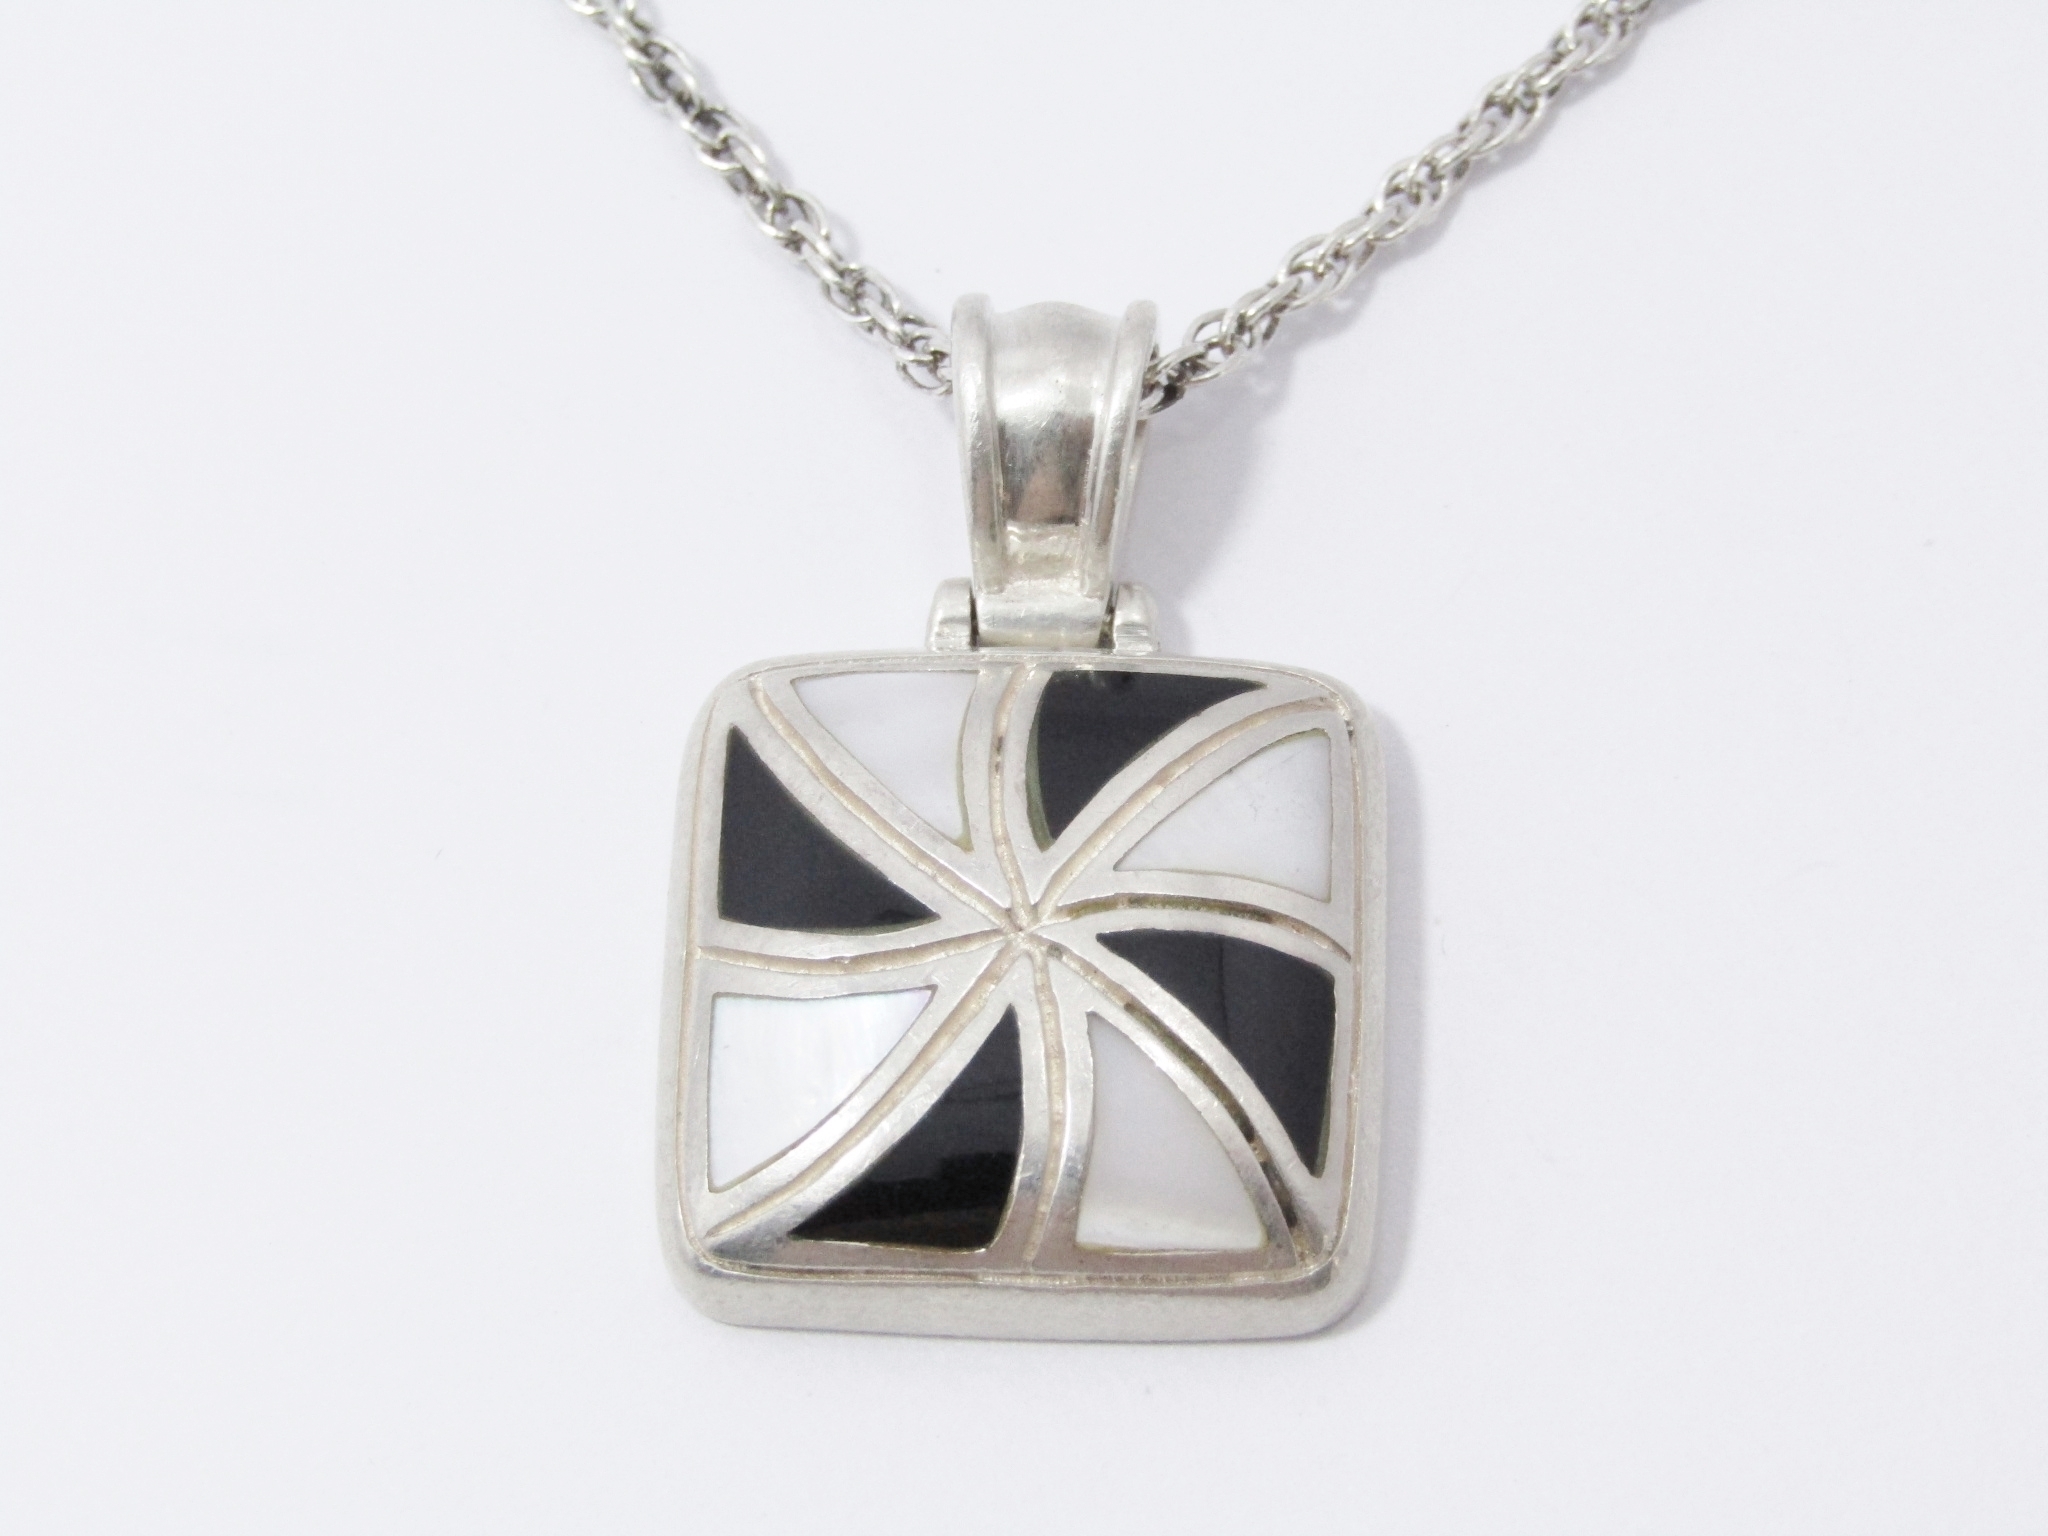 A Gorgeous Square Mother of Pearl and Black inlay Pendant On Chain in Sterling Silver.